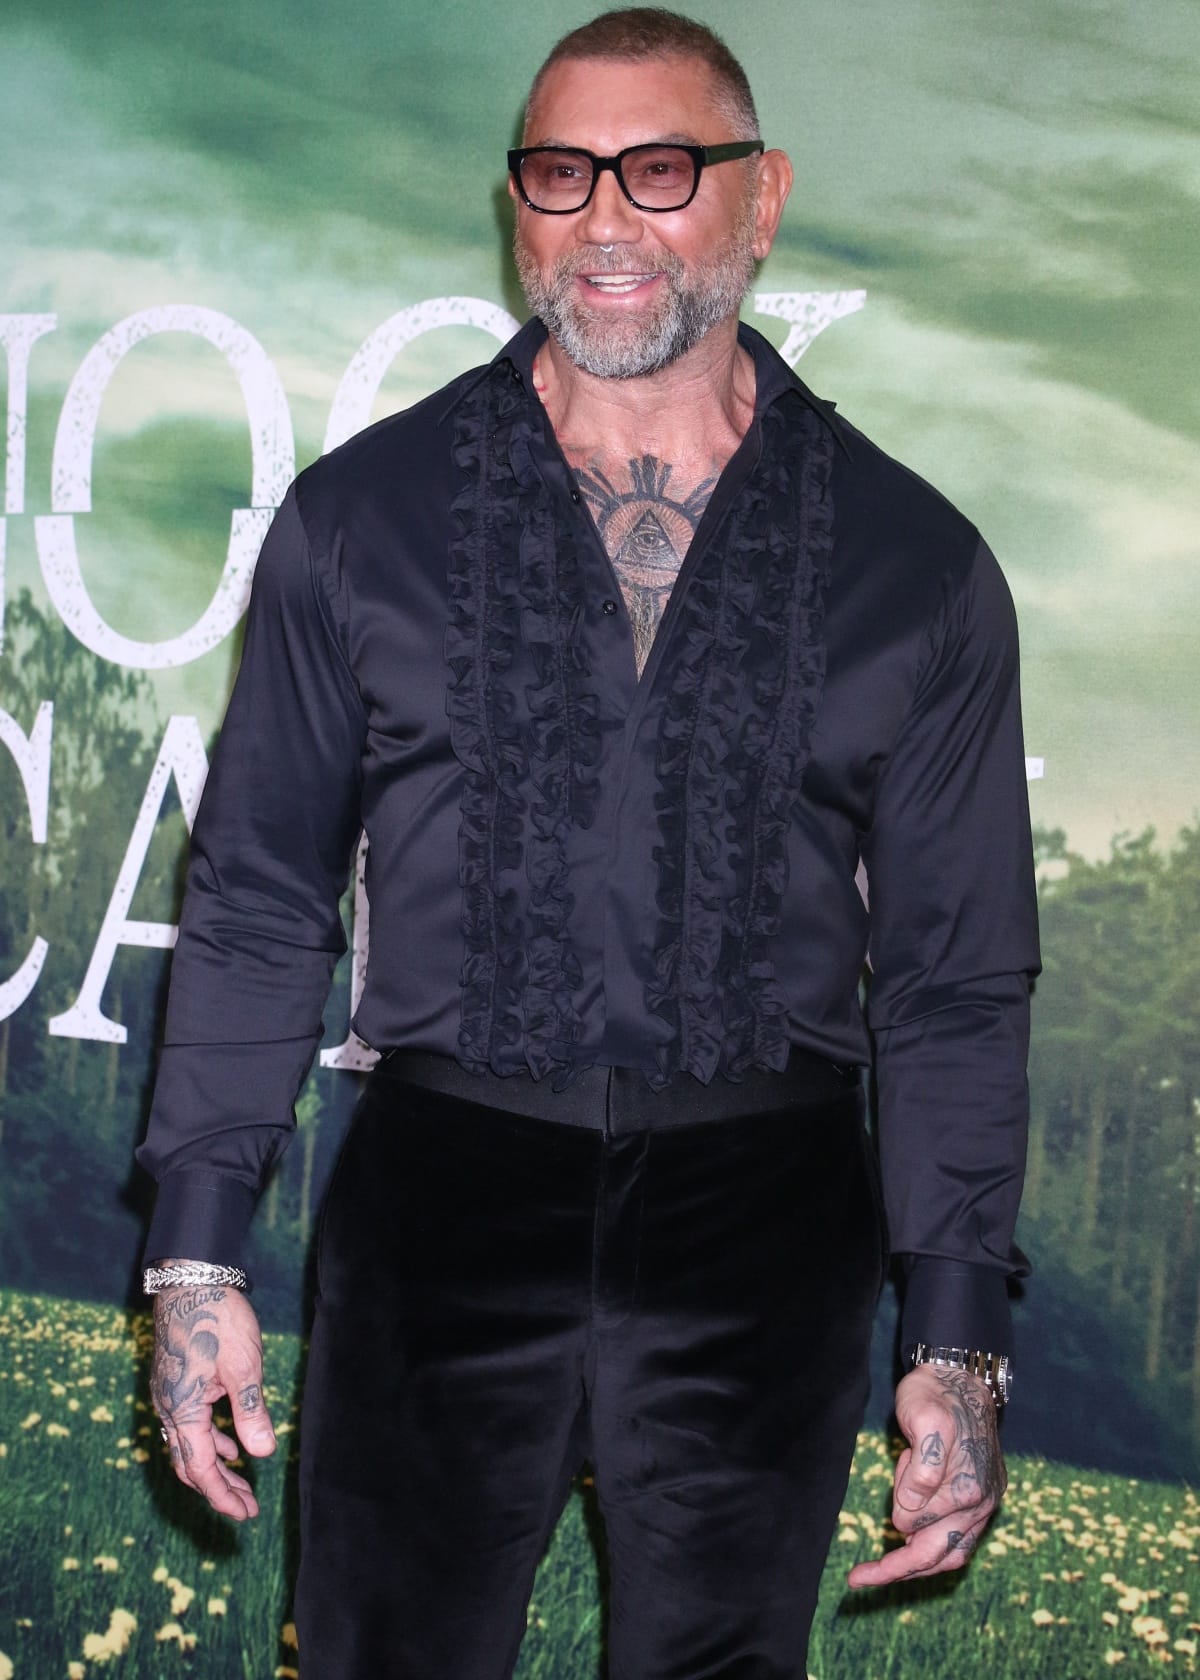 Dave Bautista at the premiere of Knock at the Cabin